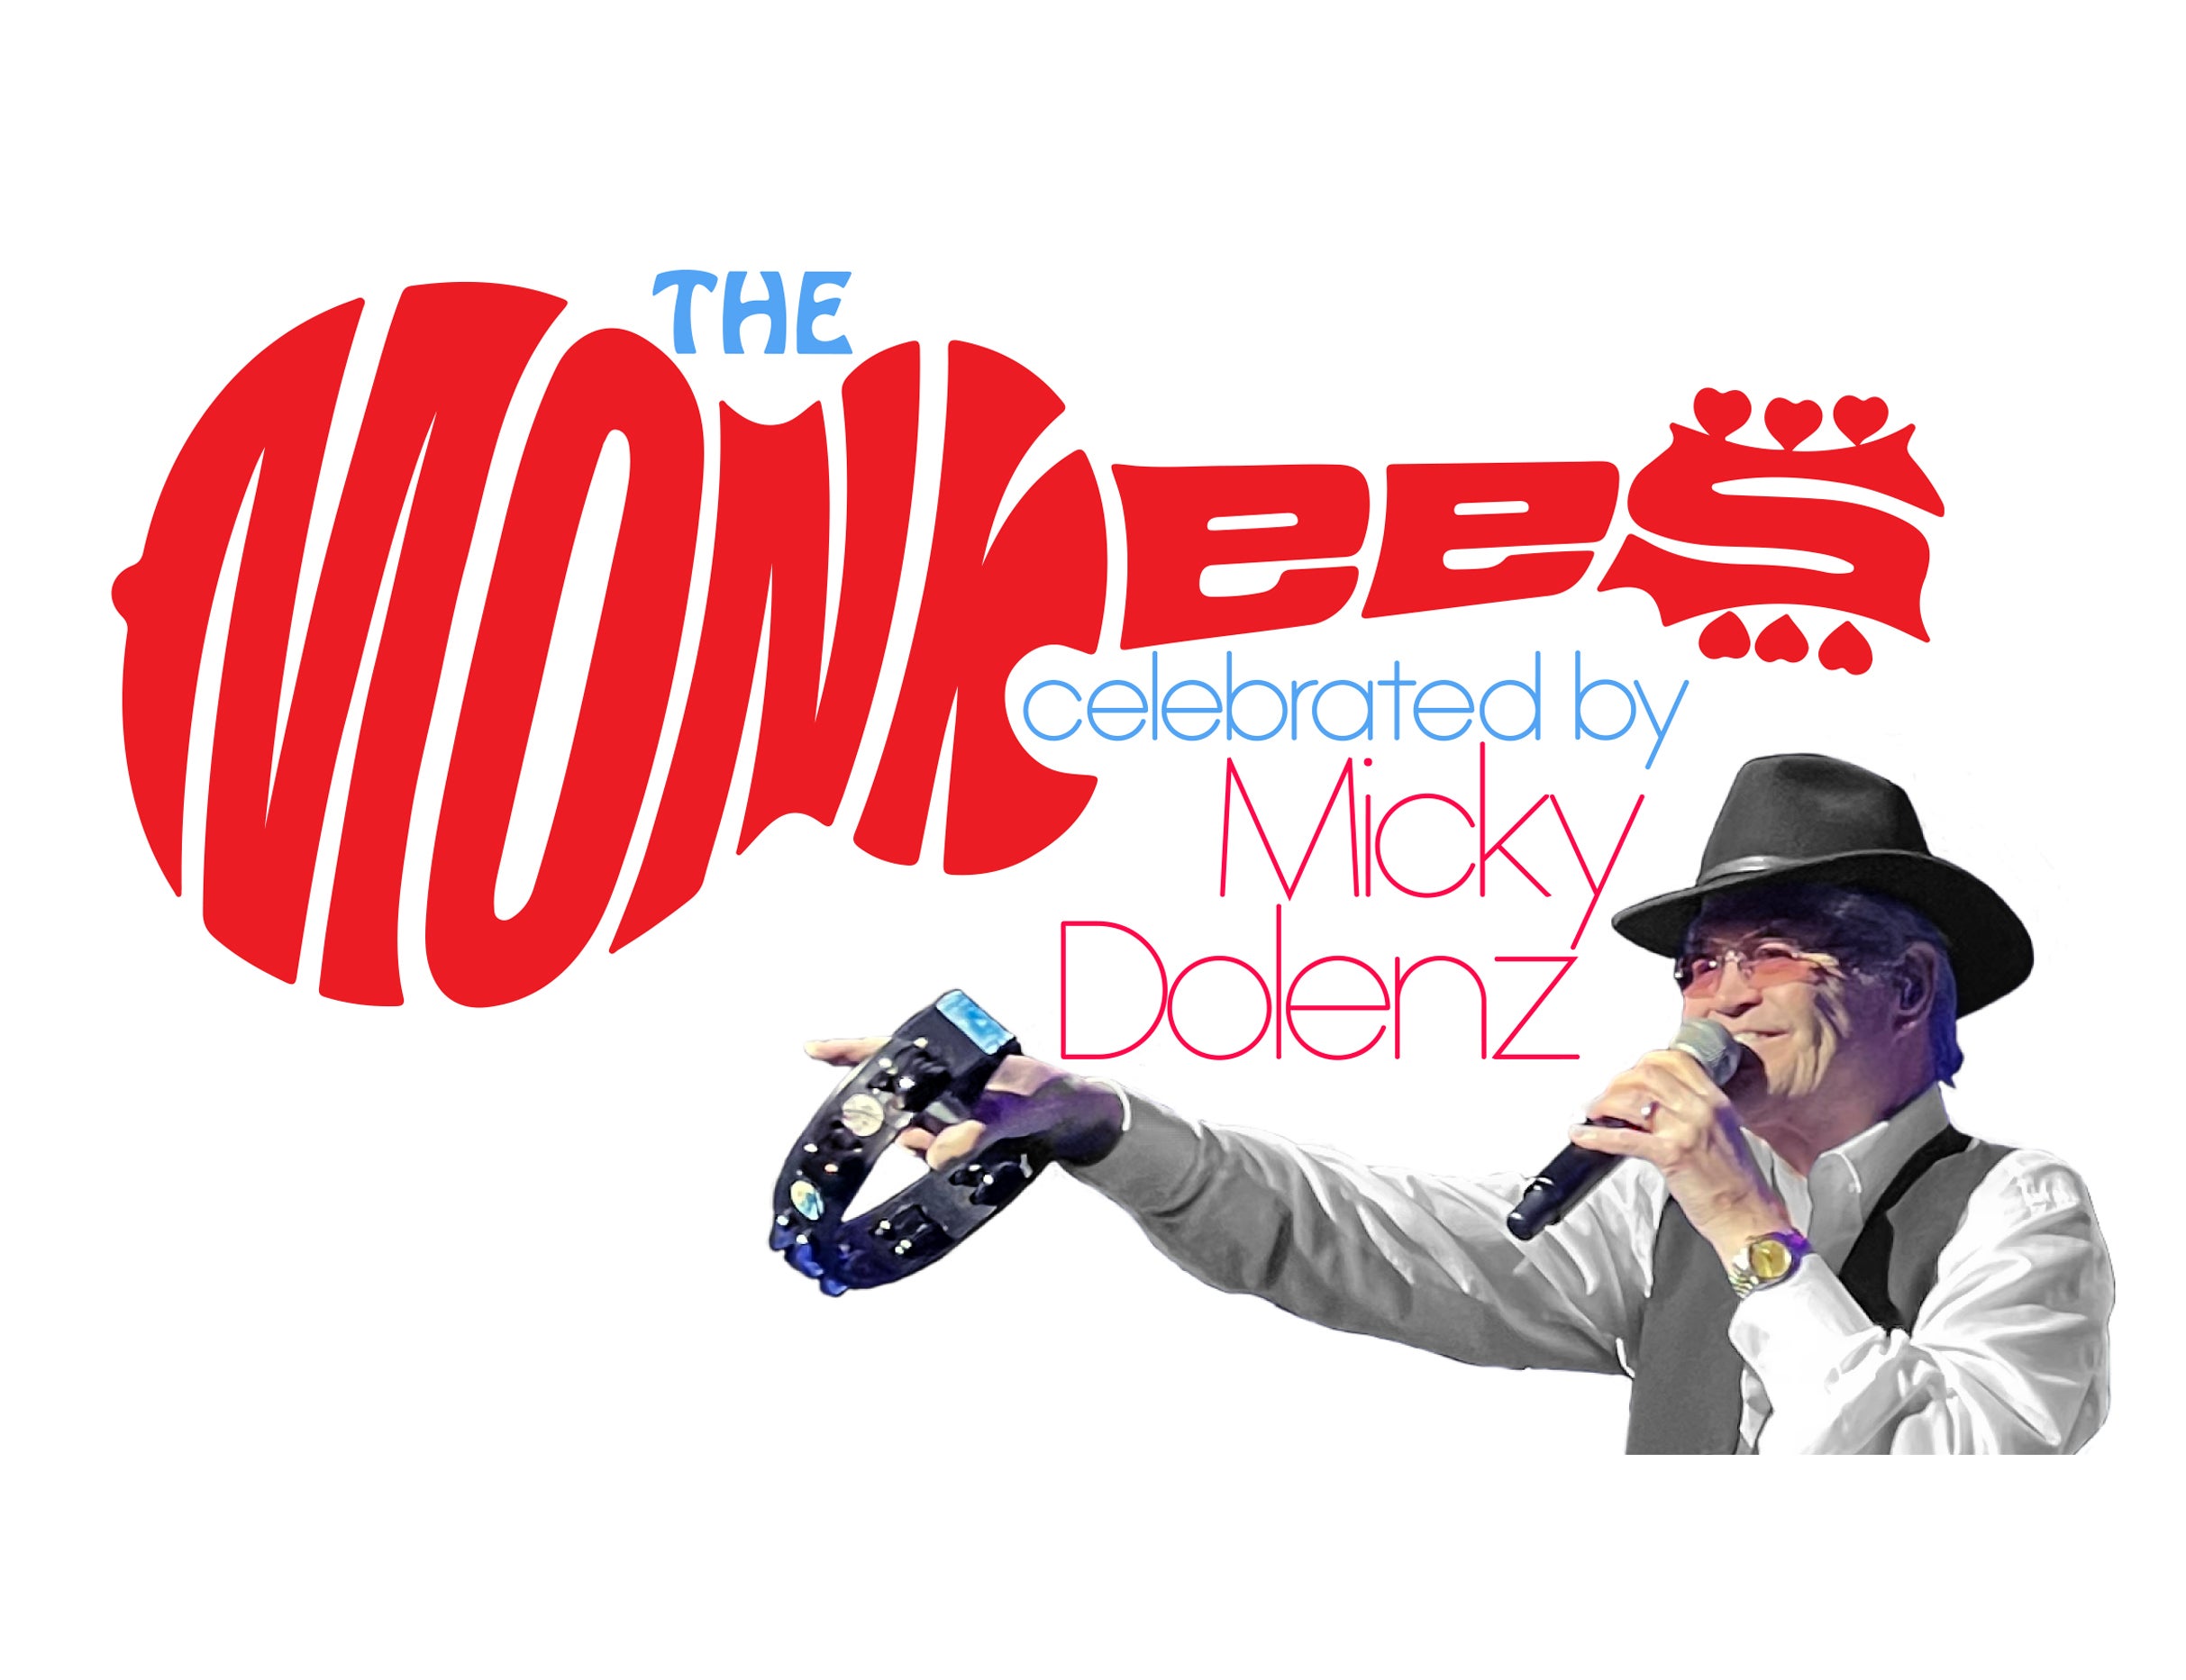 The Monkees Celebrated By Micky Dolenz in Englewood promo photo for Official Platinum Onsale presale offer code